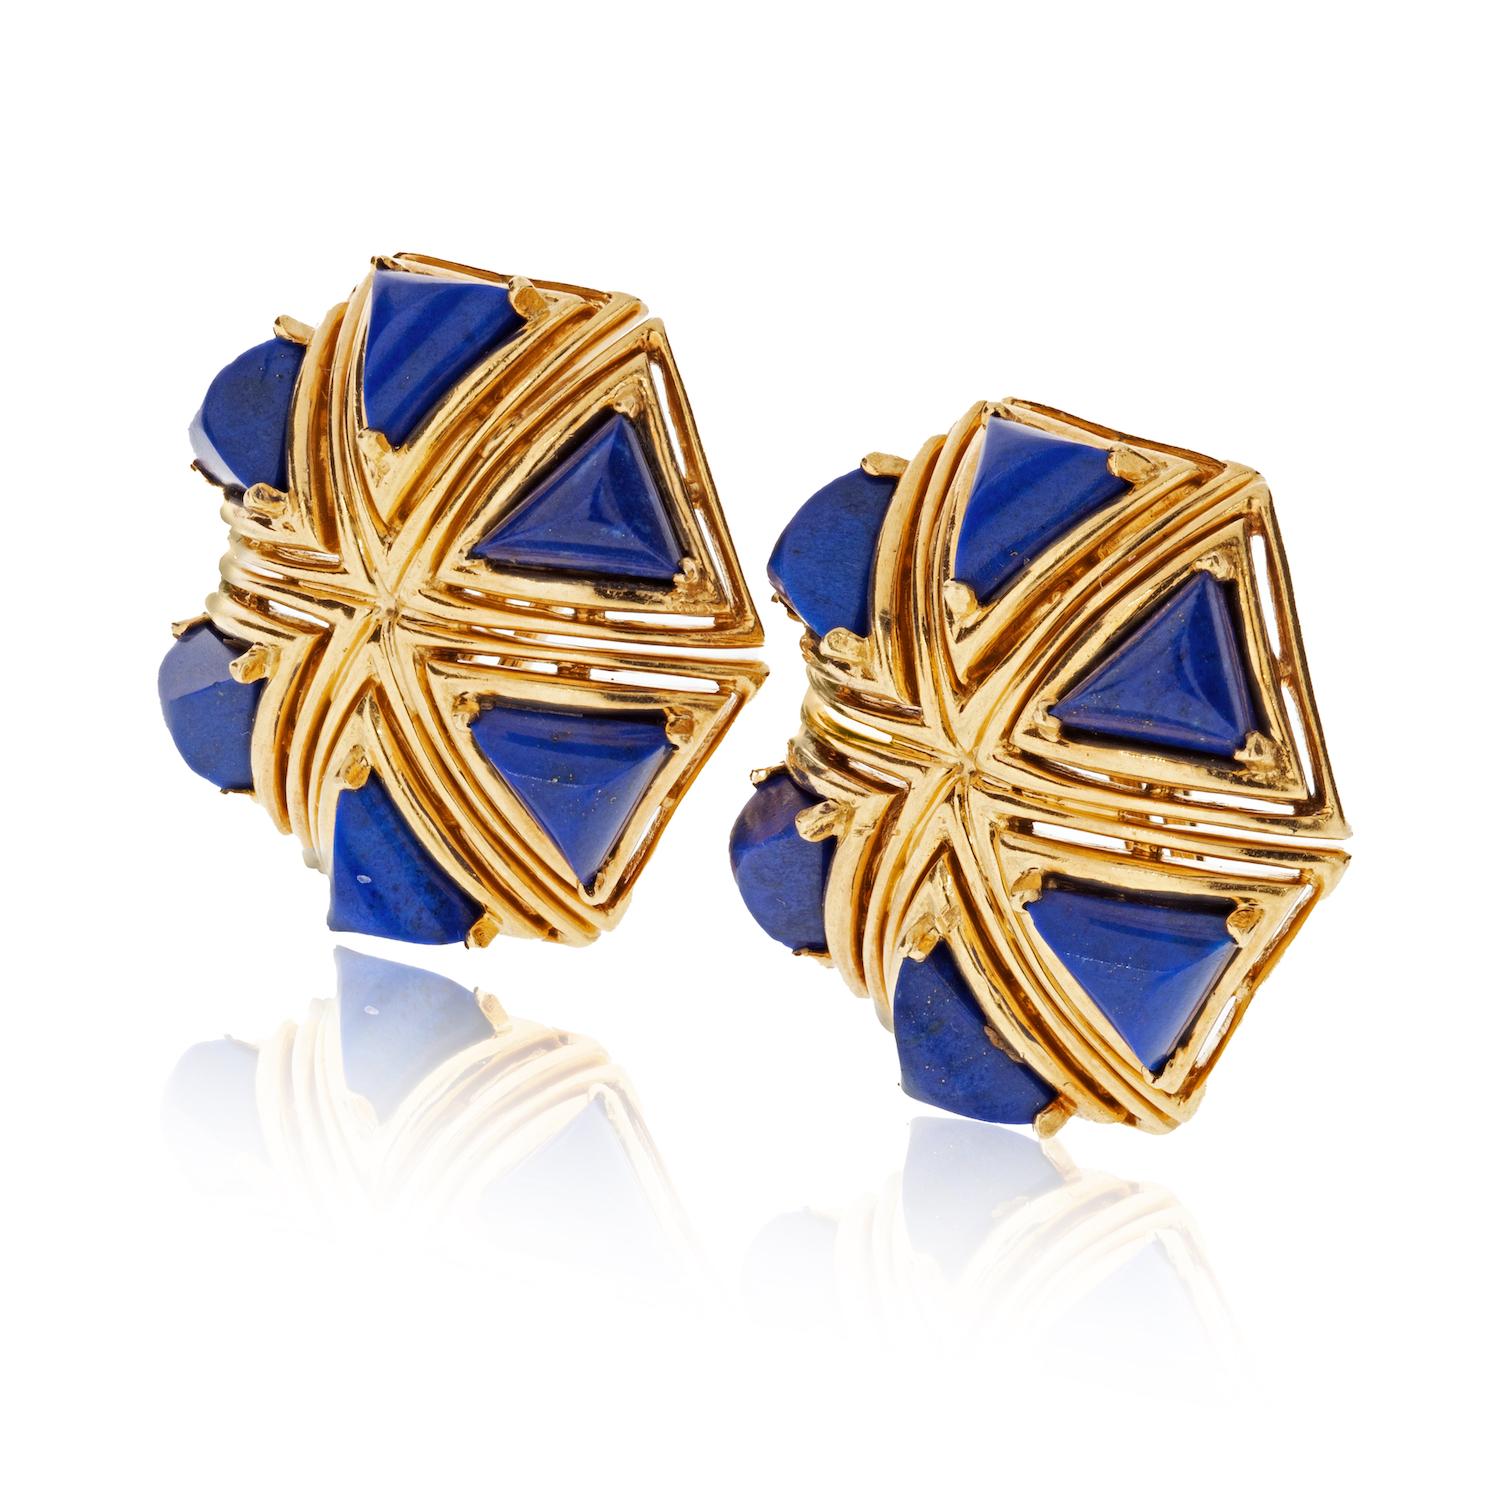 Vintage Lapis Earrings by Tiffany & Co. 

In general, the 1970s were about statement jewelry. Pendants and other jewelry pieces were large and attention-grabbing. Also, the Bohemian style was very strong in 1970's. Very counterculture-ish it was